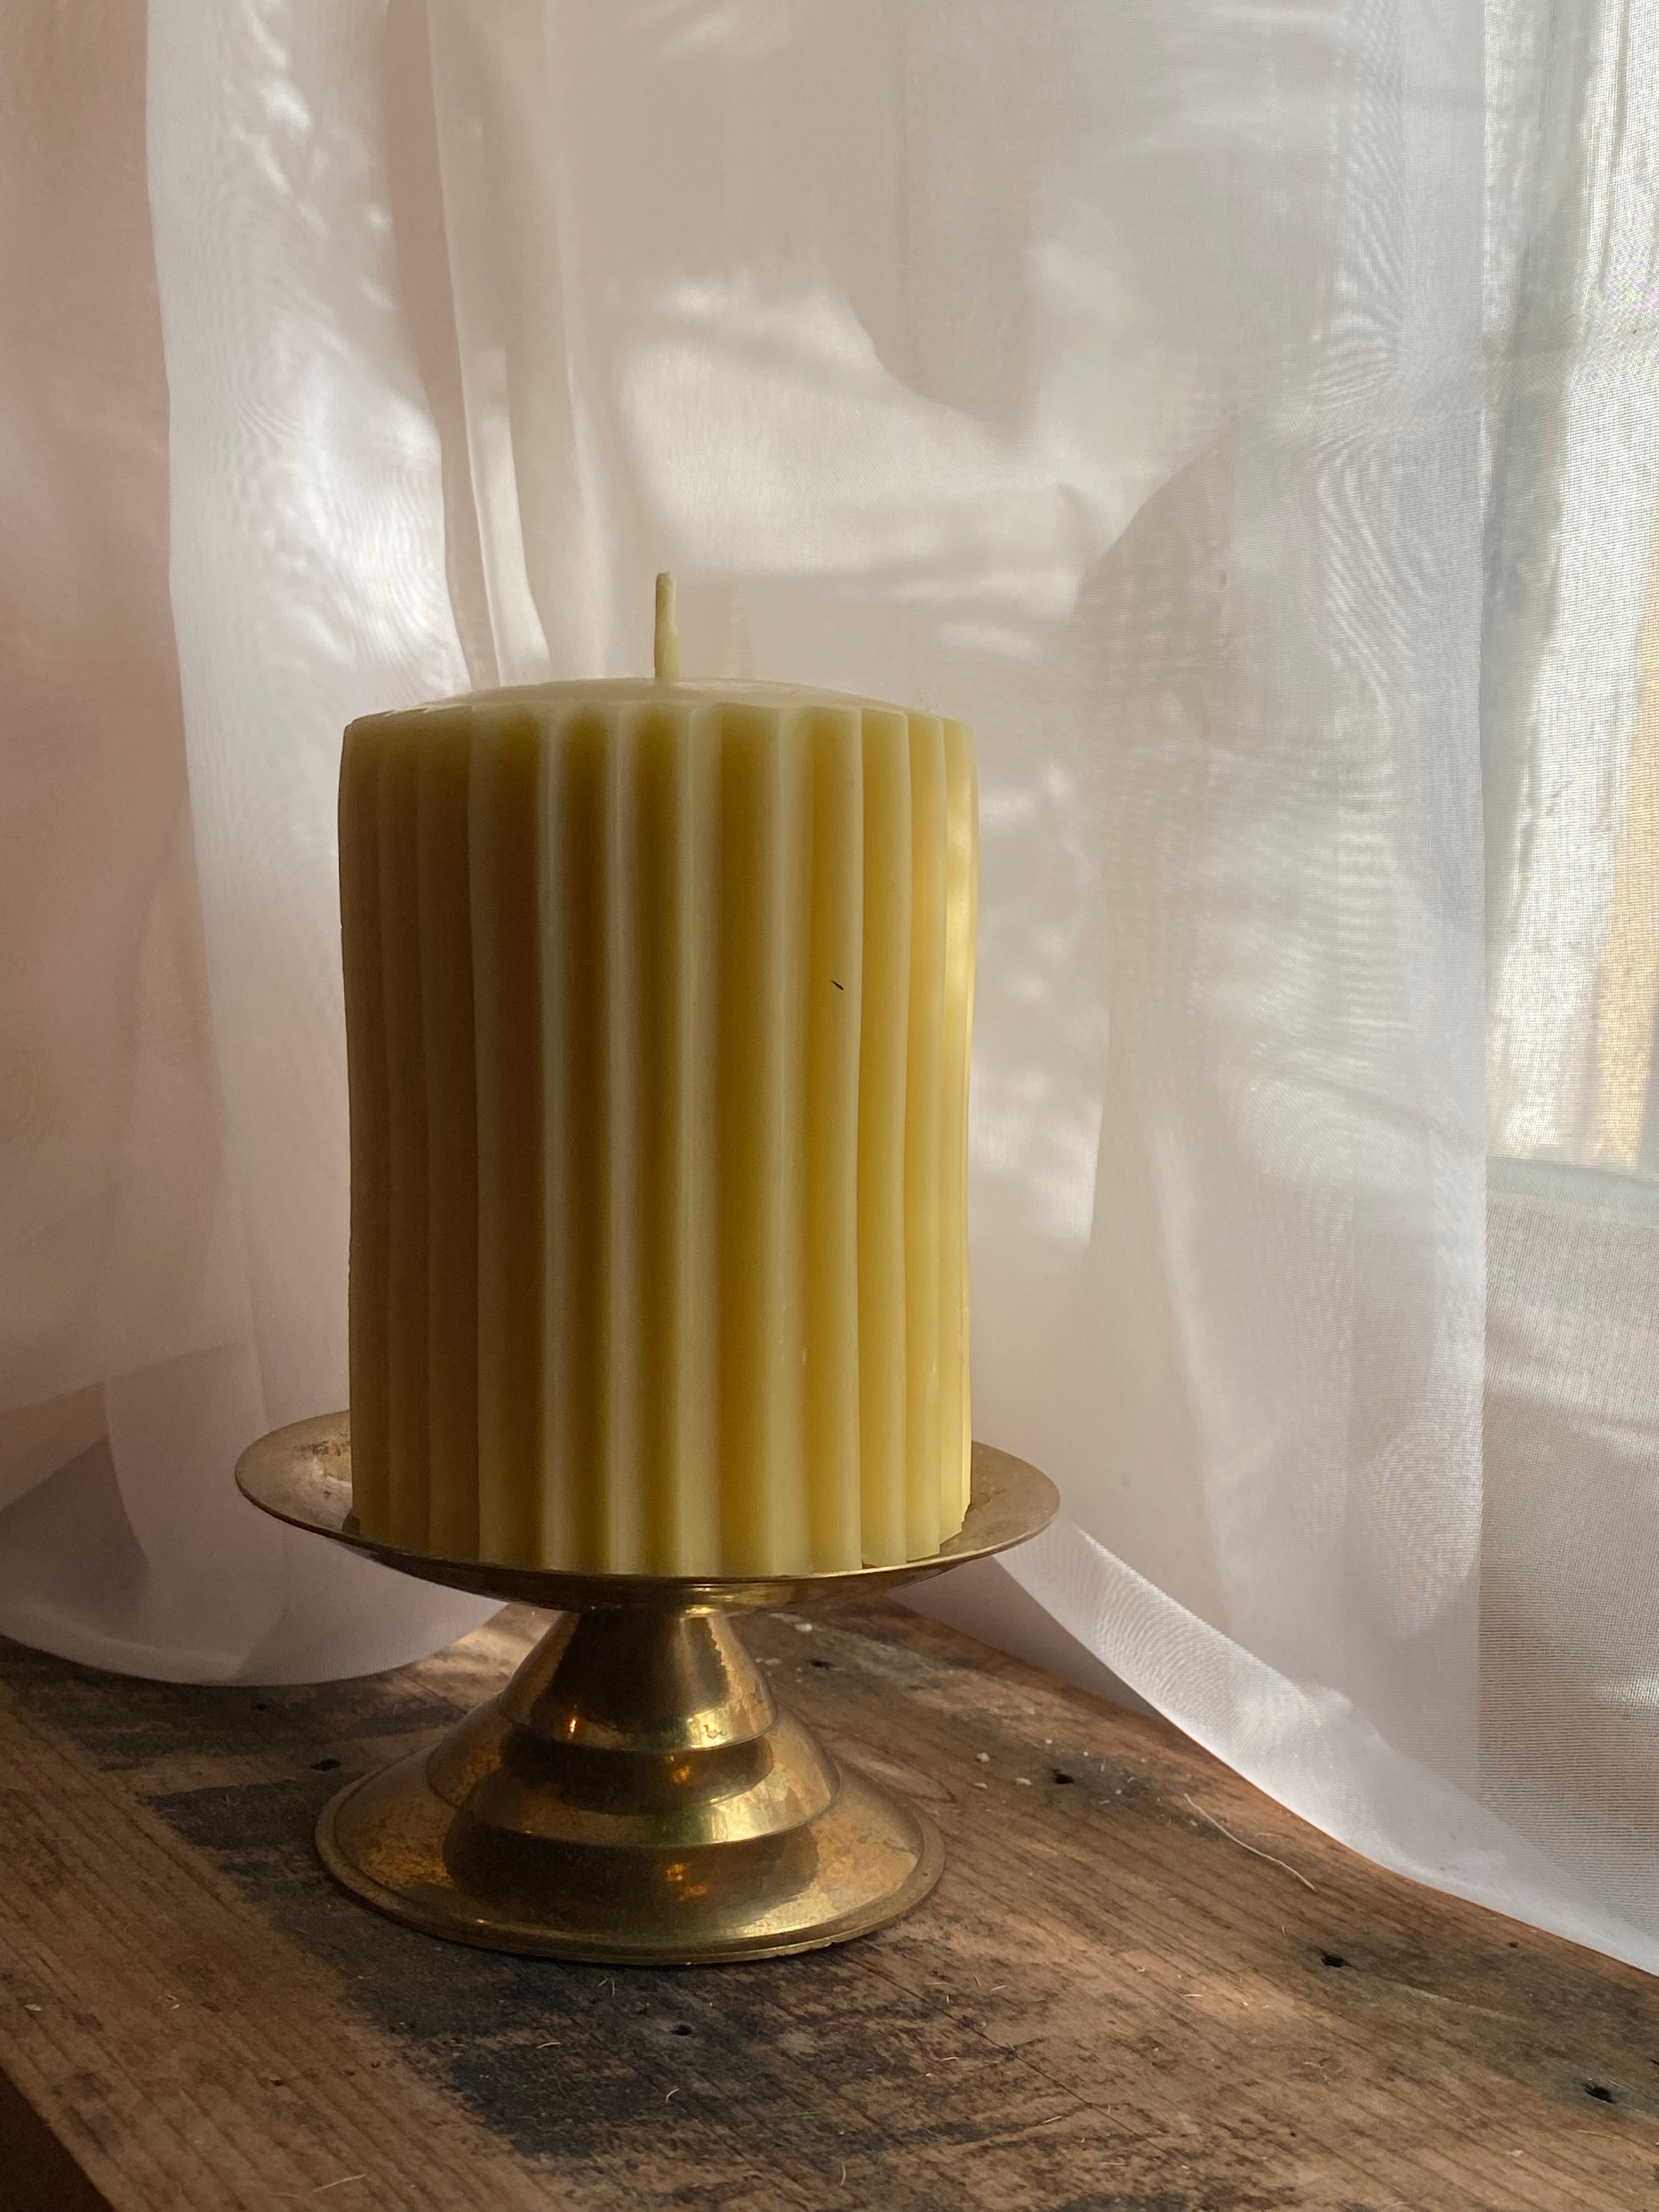 Starburst Pillar Candle- 2.5 inches x 3.5 inches